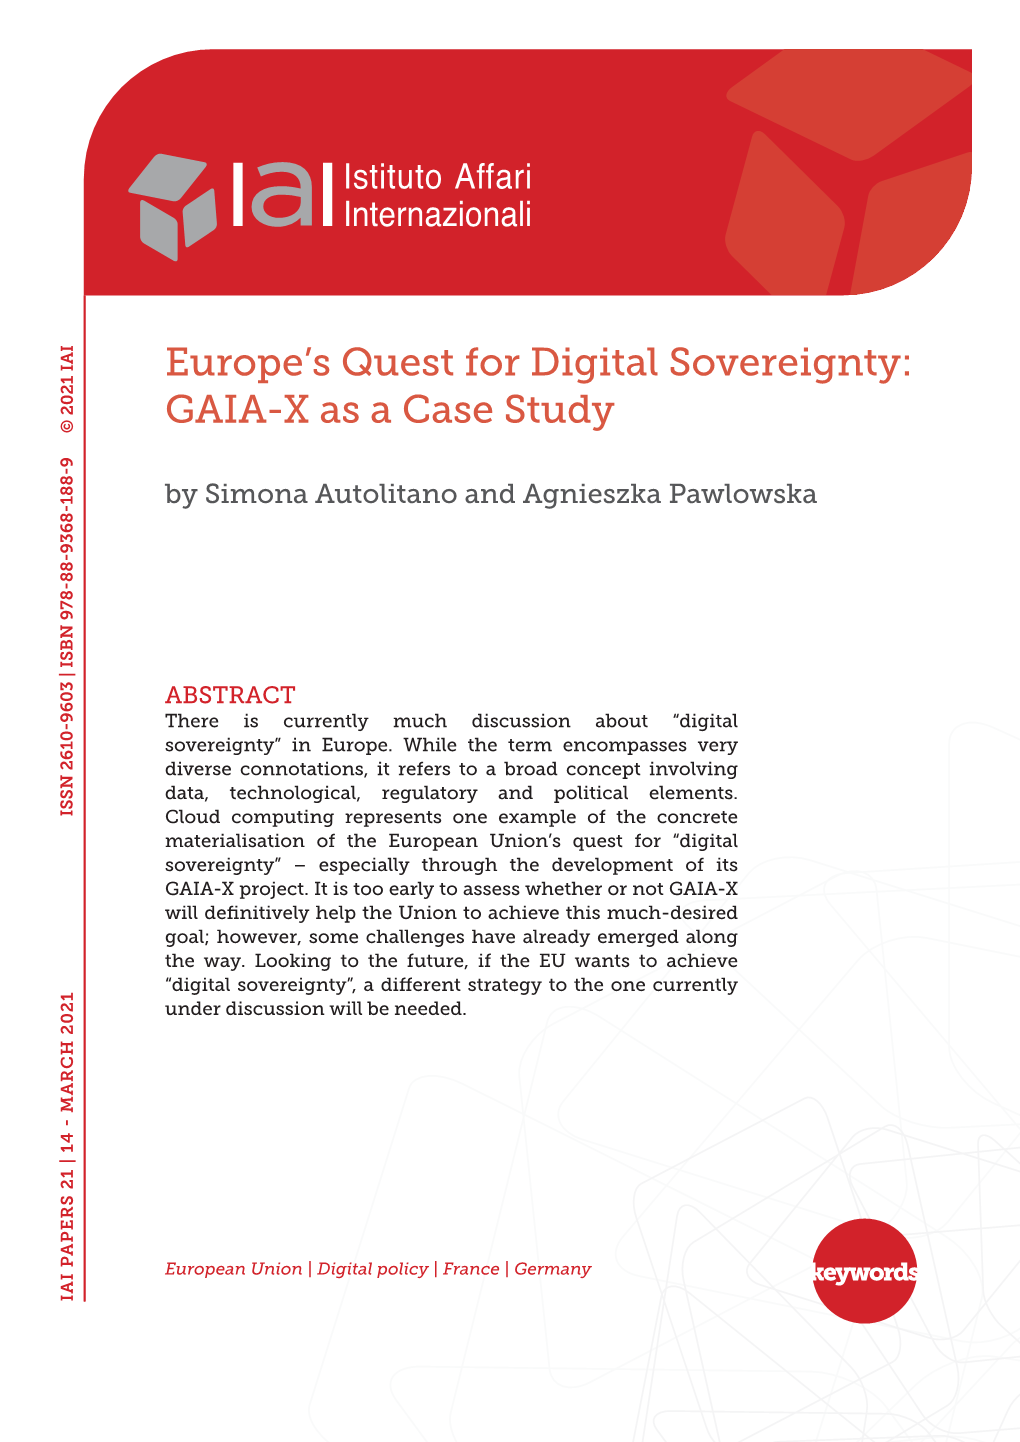 Europe's Quest for Digital Sovereignty: GAIA-X As a Case Study